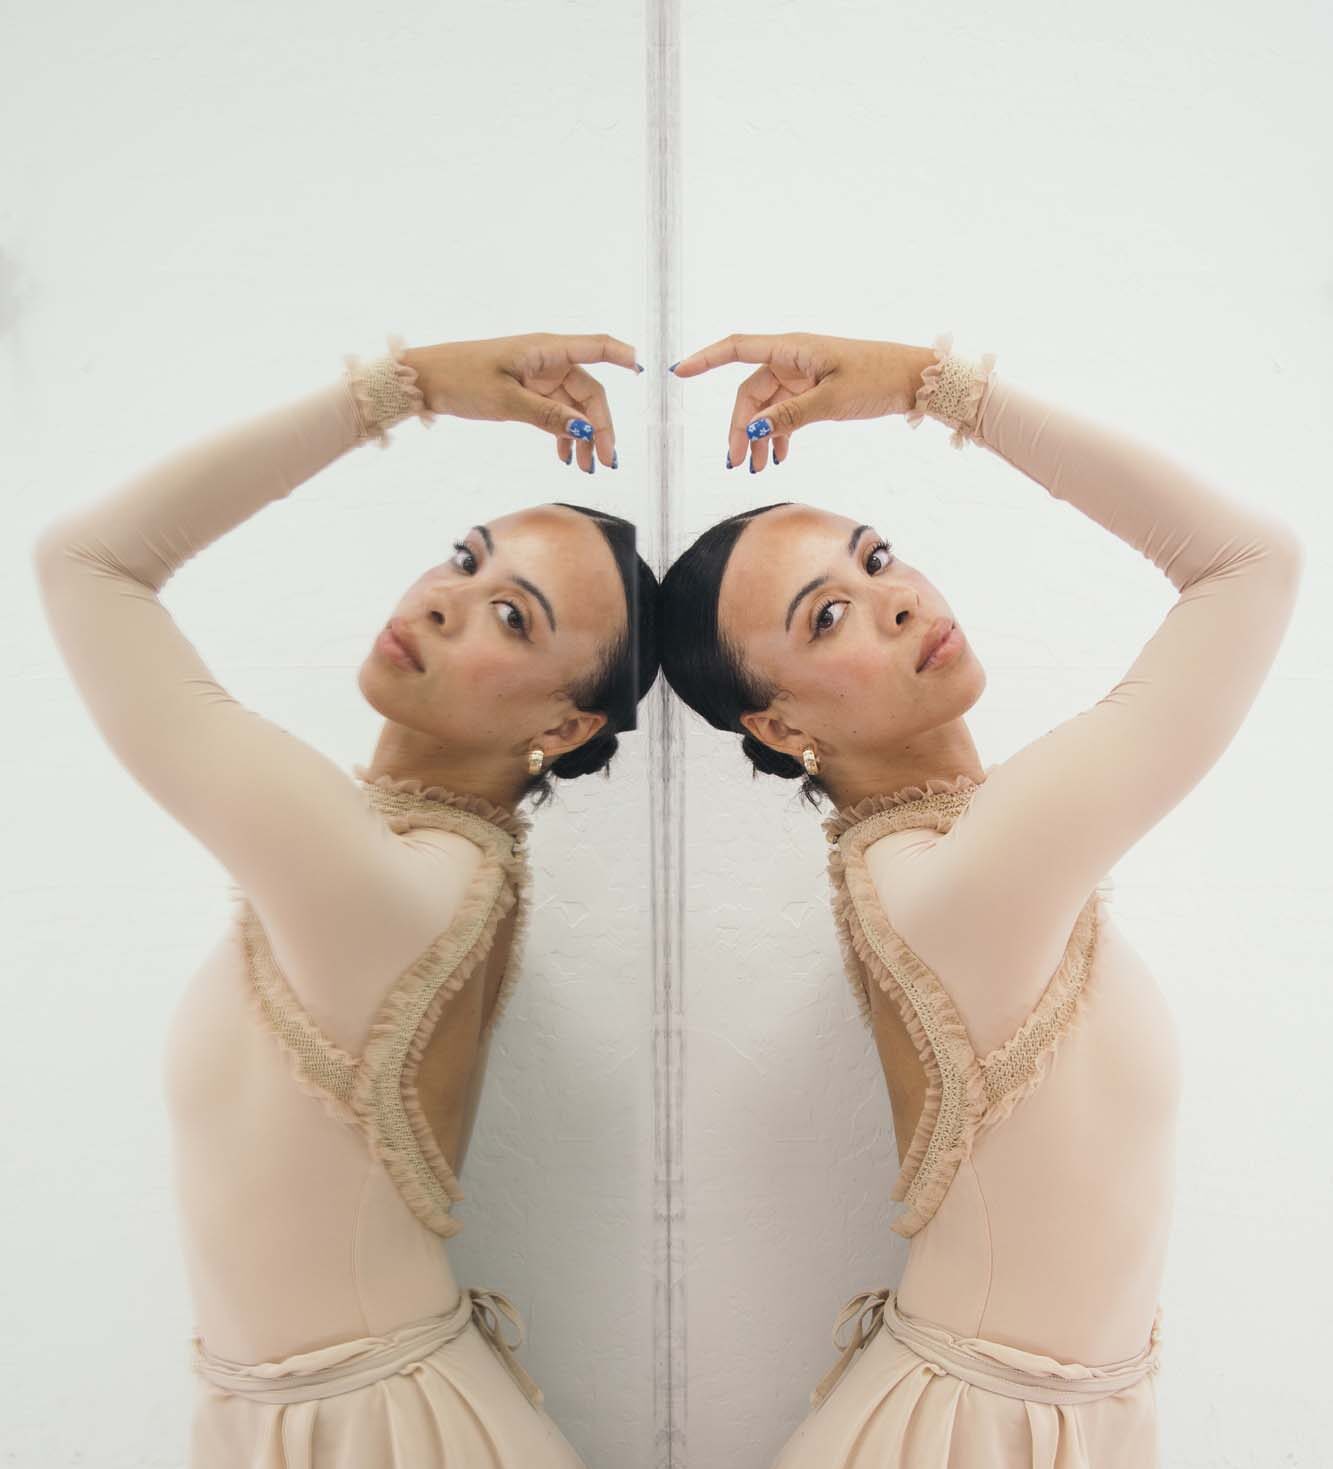 A dancer is posing for a picture while looking directly at the camera, and her image is perfectly reflected in a mirror.